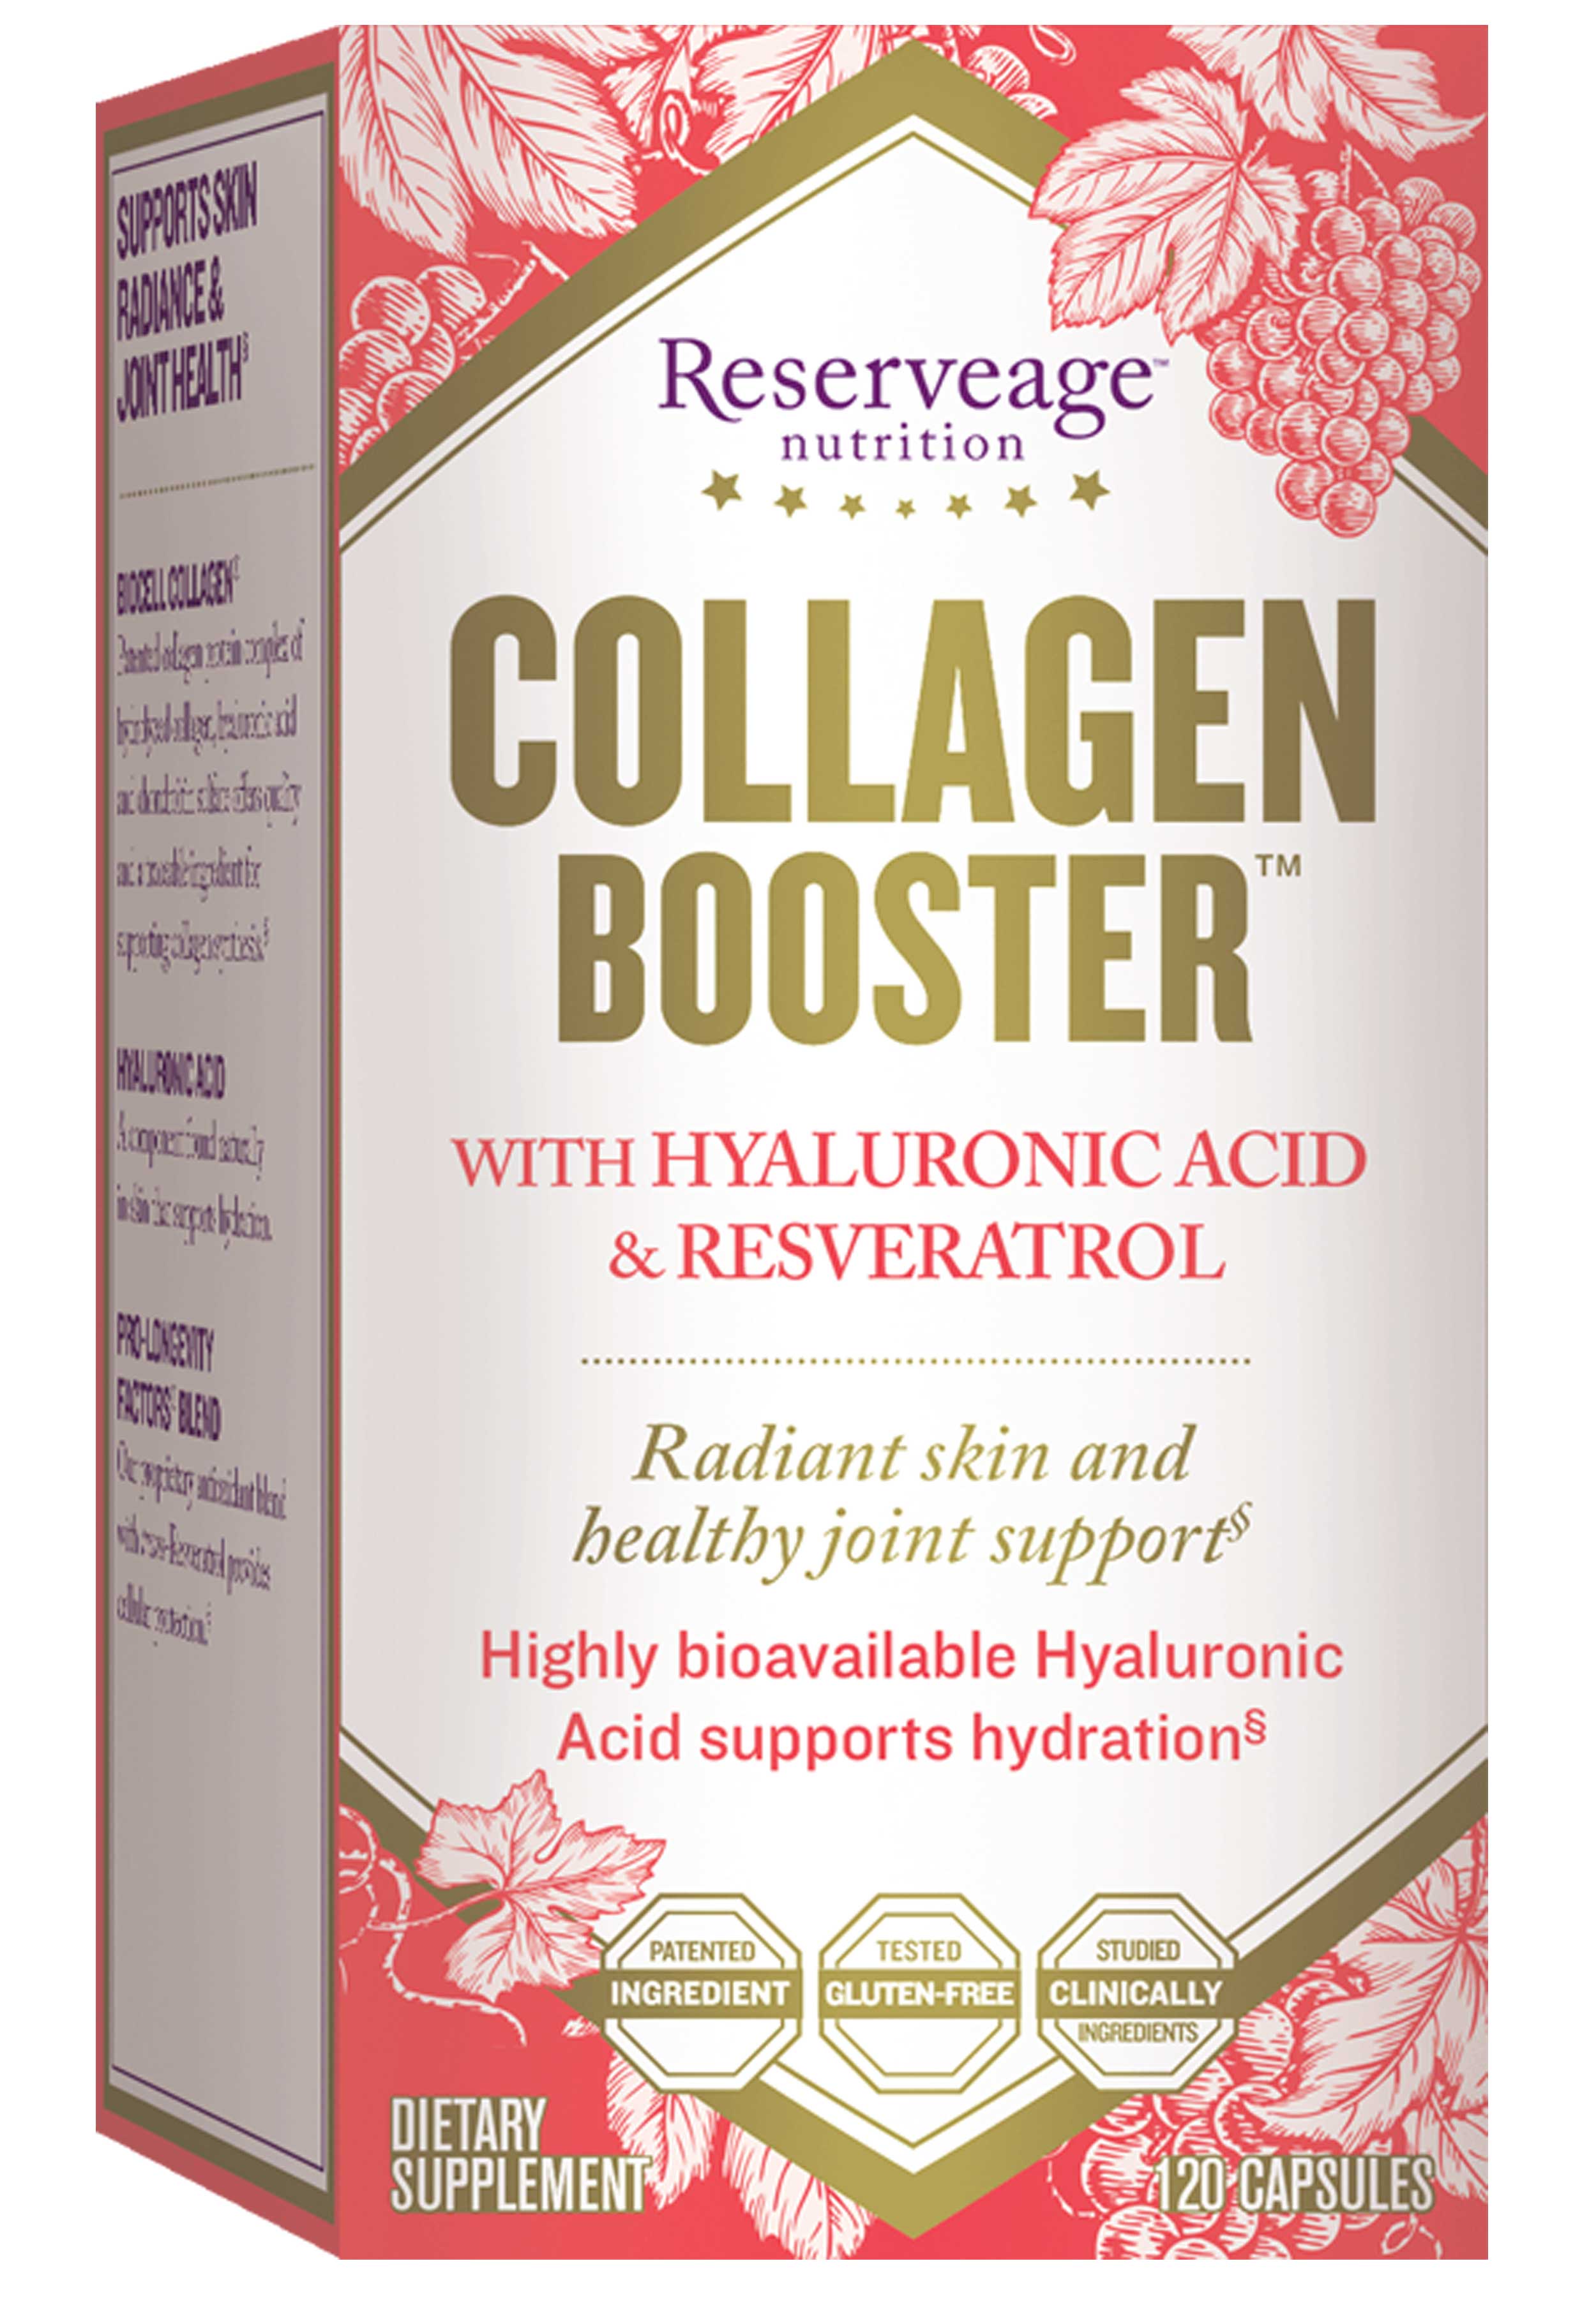 Reserveage Collagen Booster ™ For Radiant Skin And Healthy Joint Support